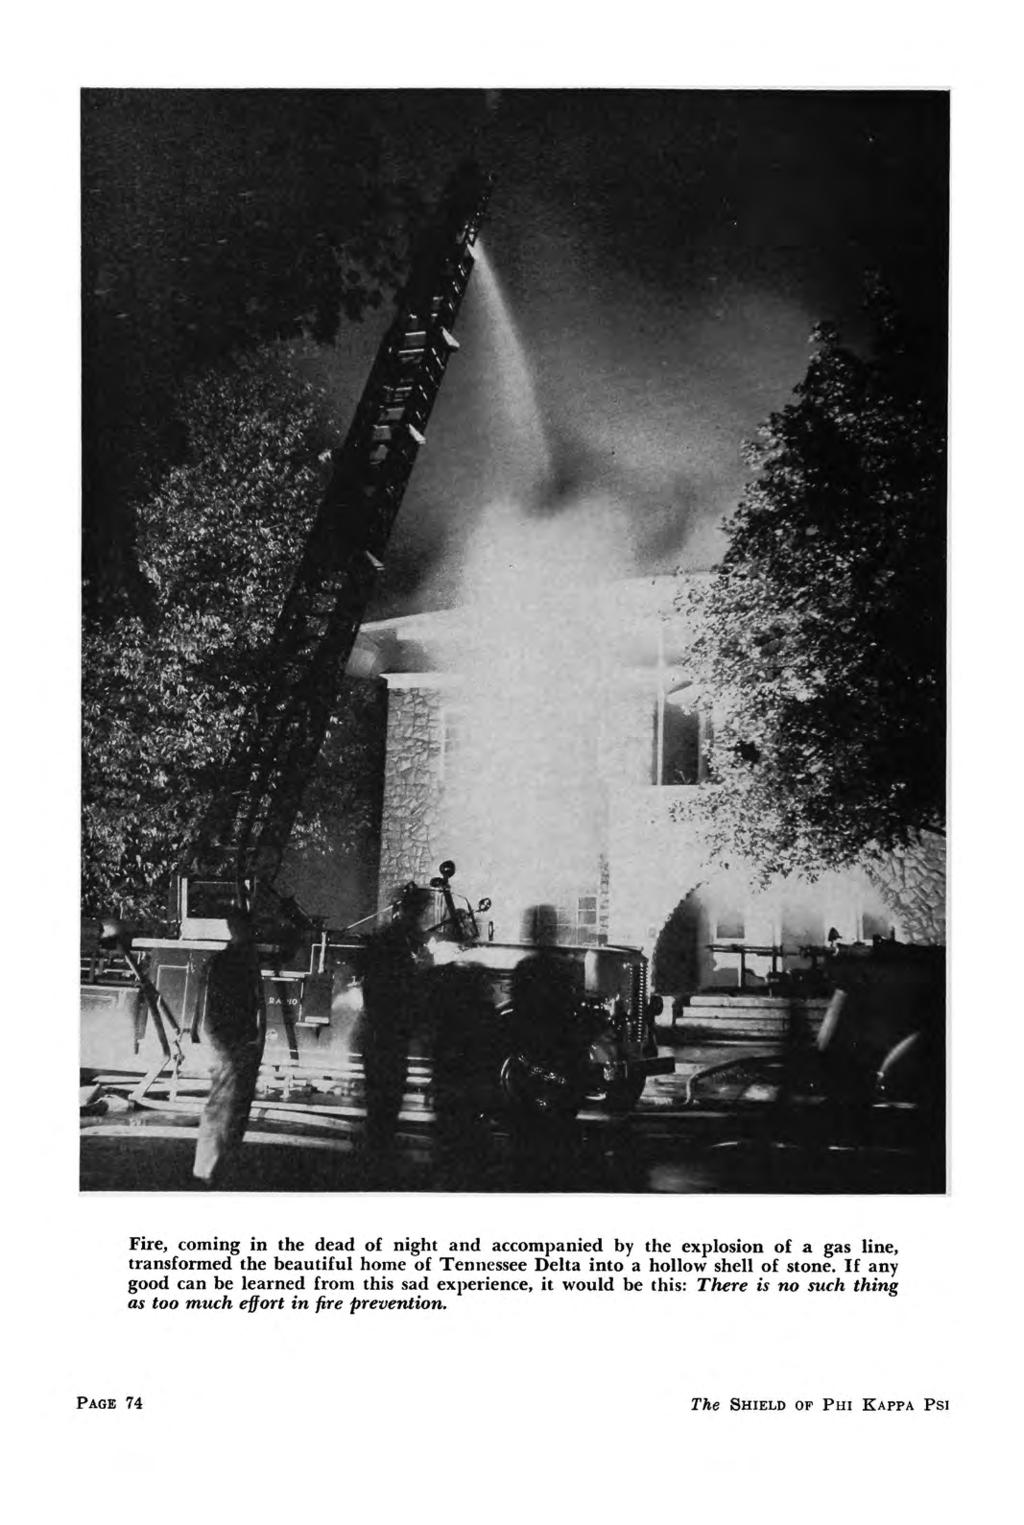 Fire, coming in the dead of night and accompanied by the explosion of a gas line, transformed the beautiful home of Tennessee Delta into a hollow shell of stone.